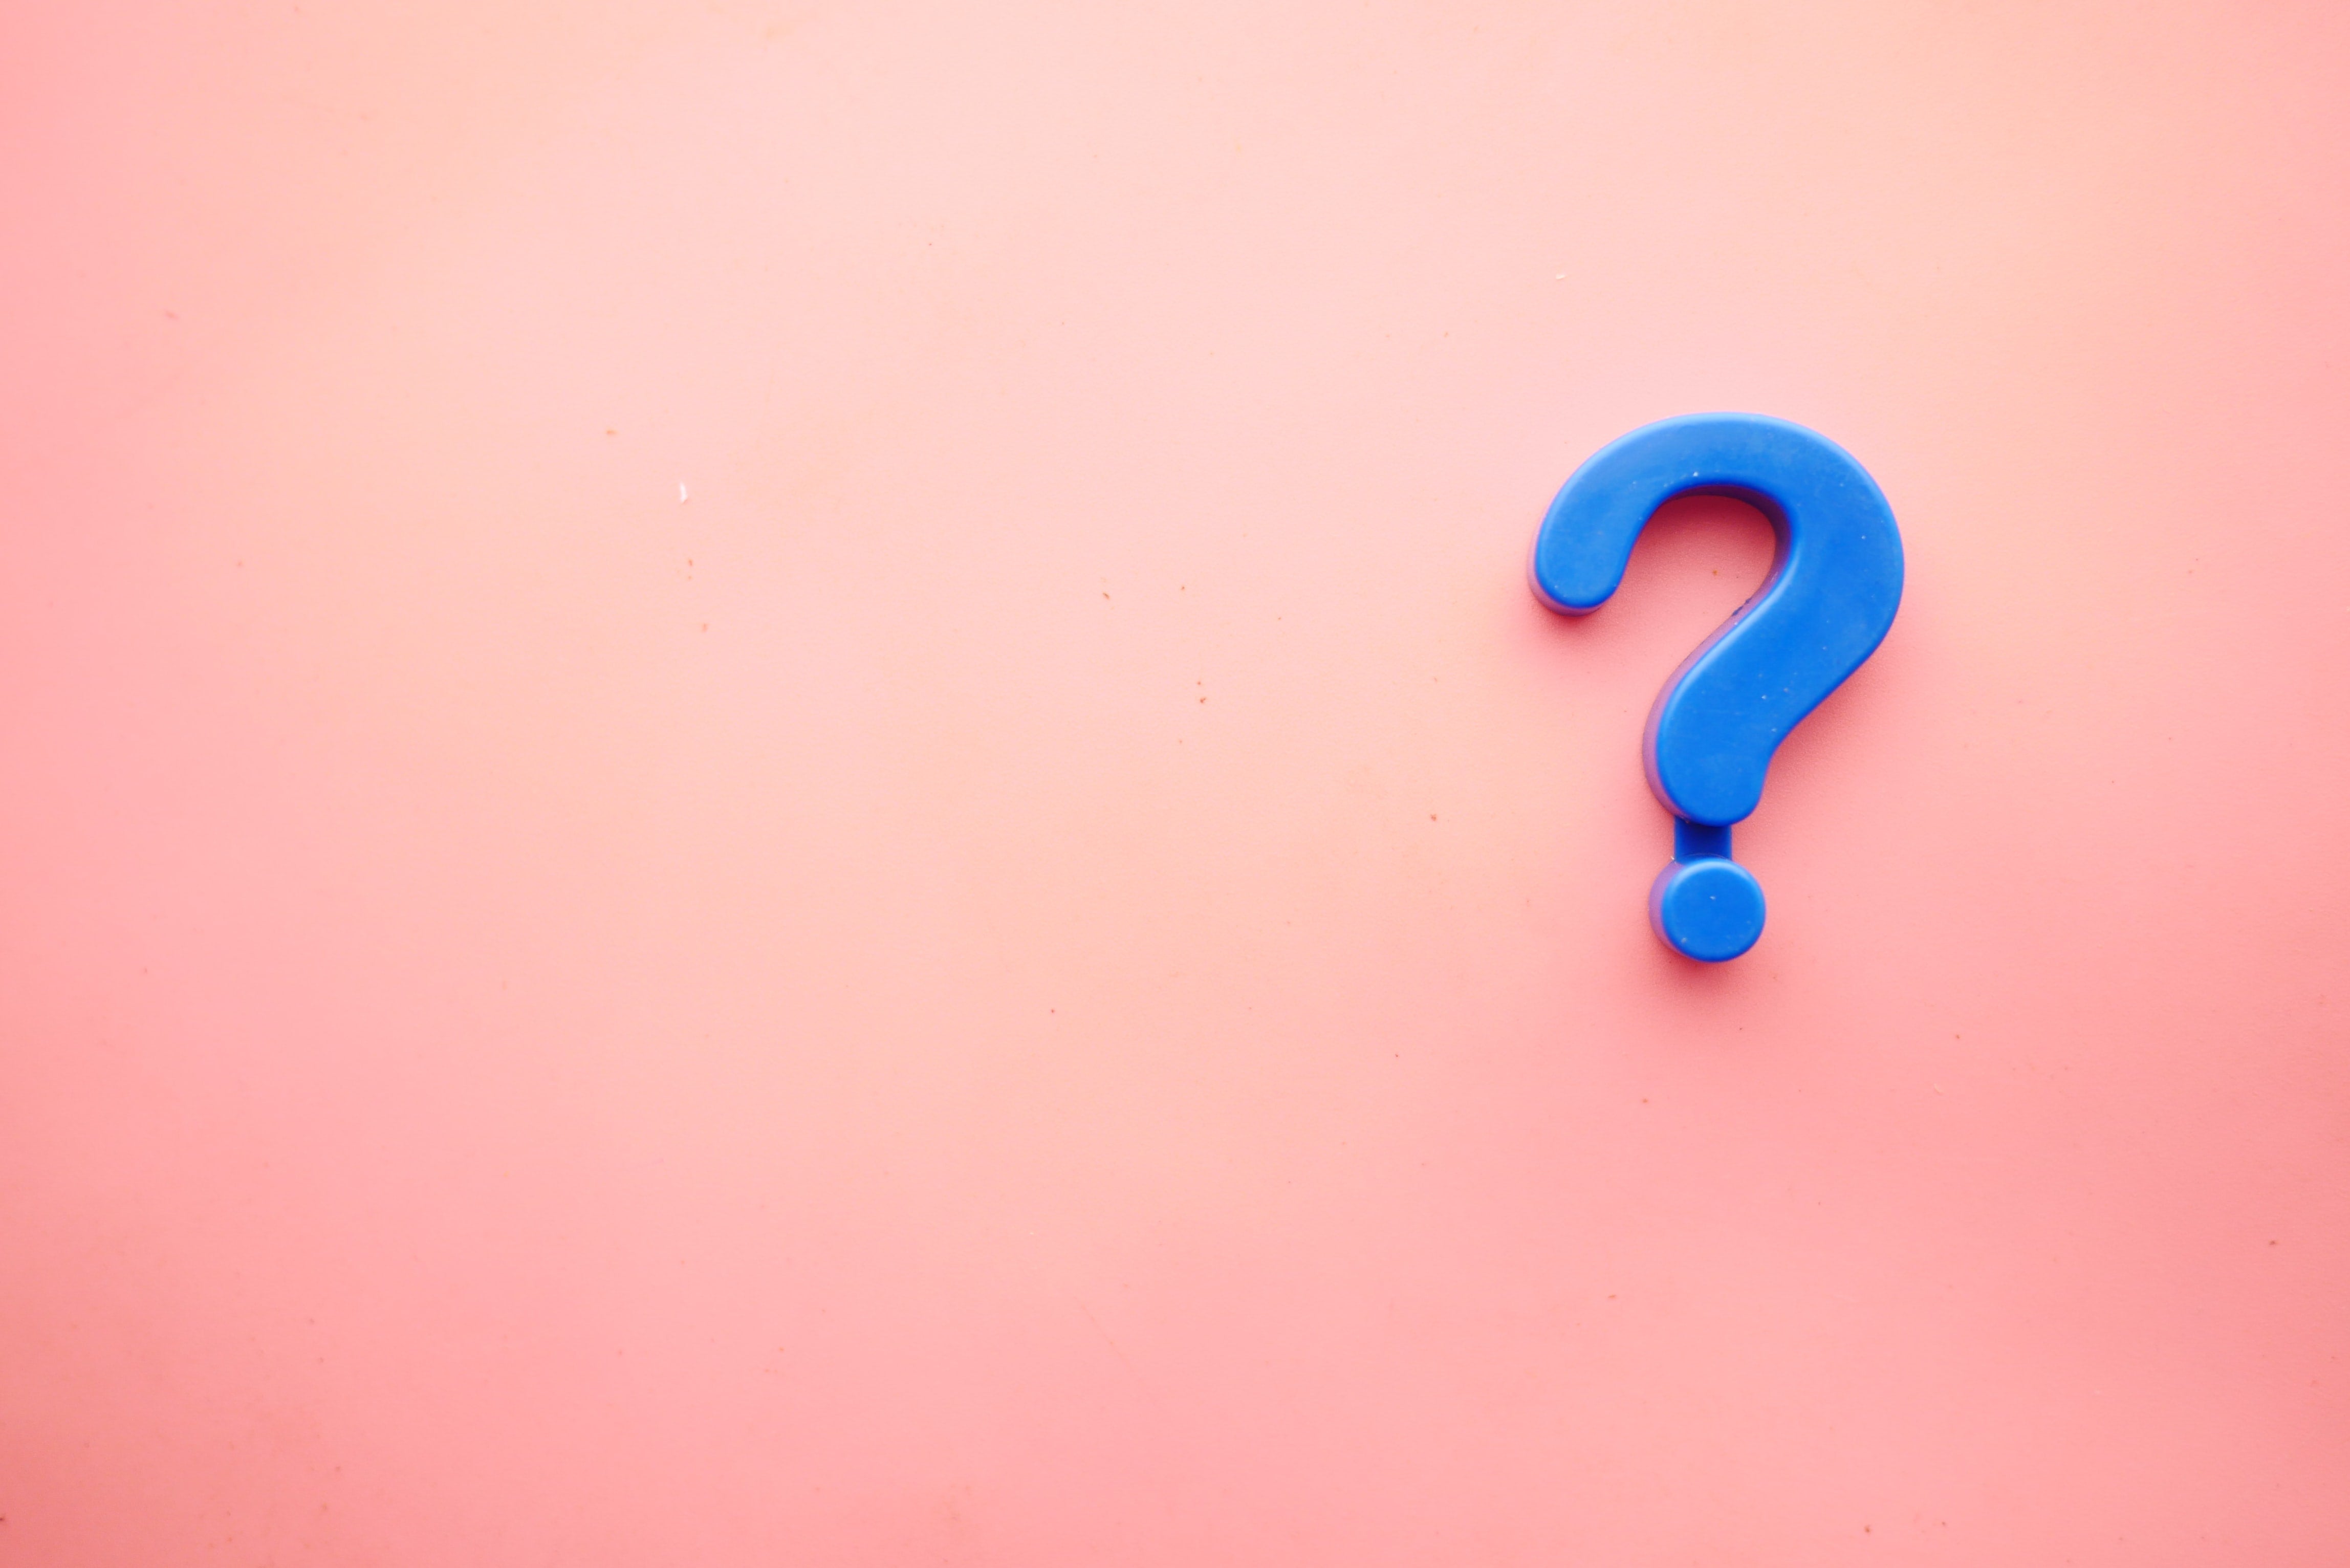 Blue question mark on a pink background.